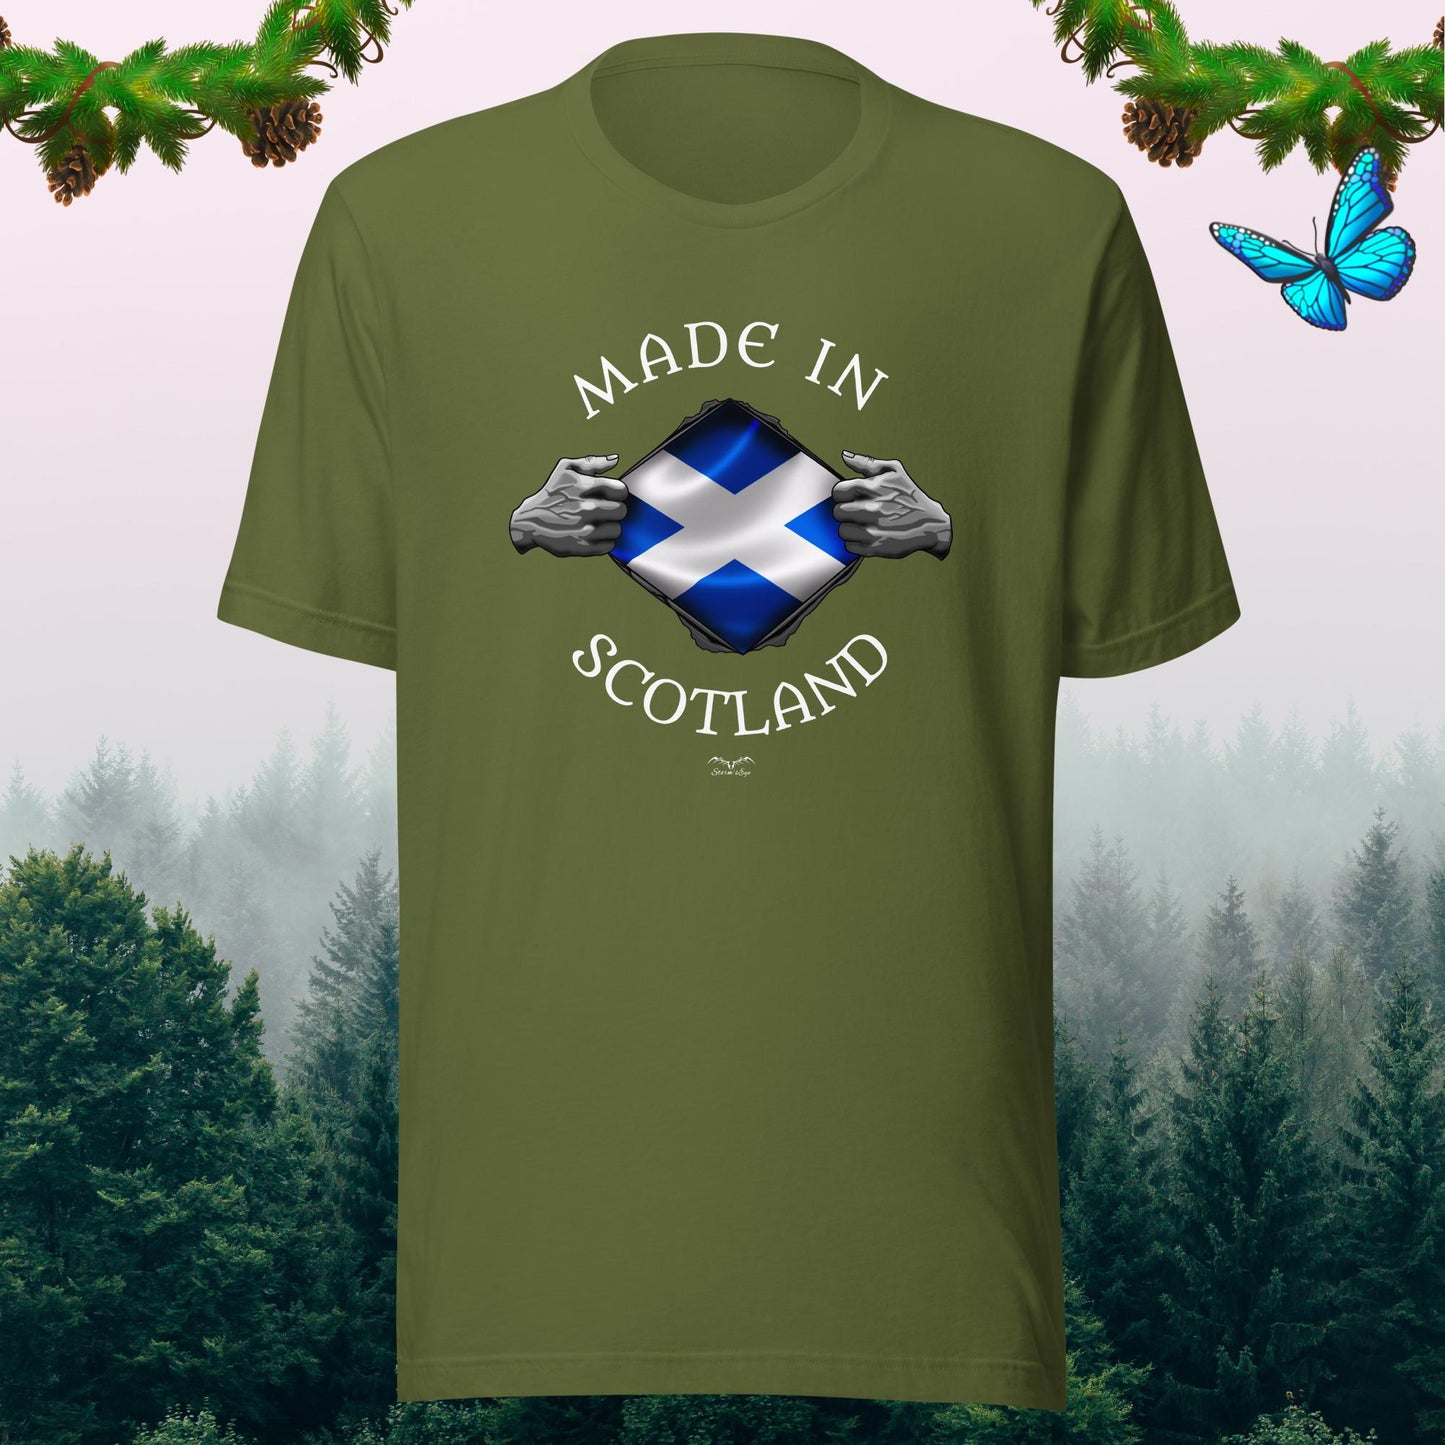 Made In Scotland Patriotic Scottish t-shirt, olive green, by Stormseye Design